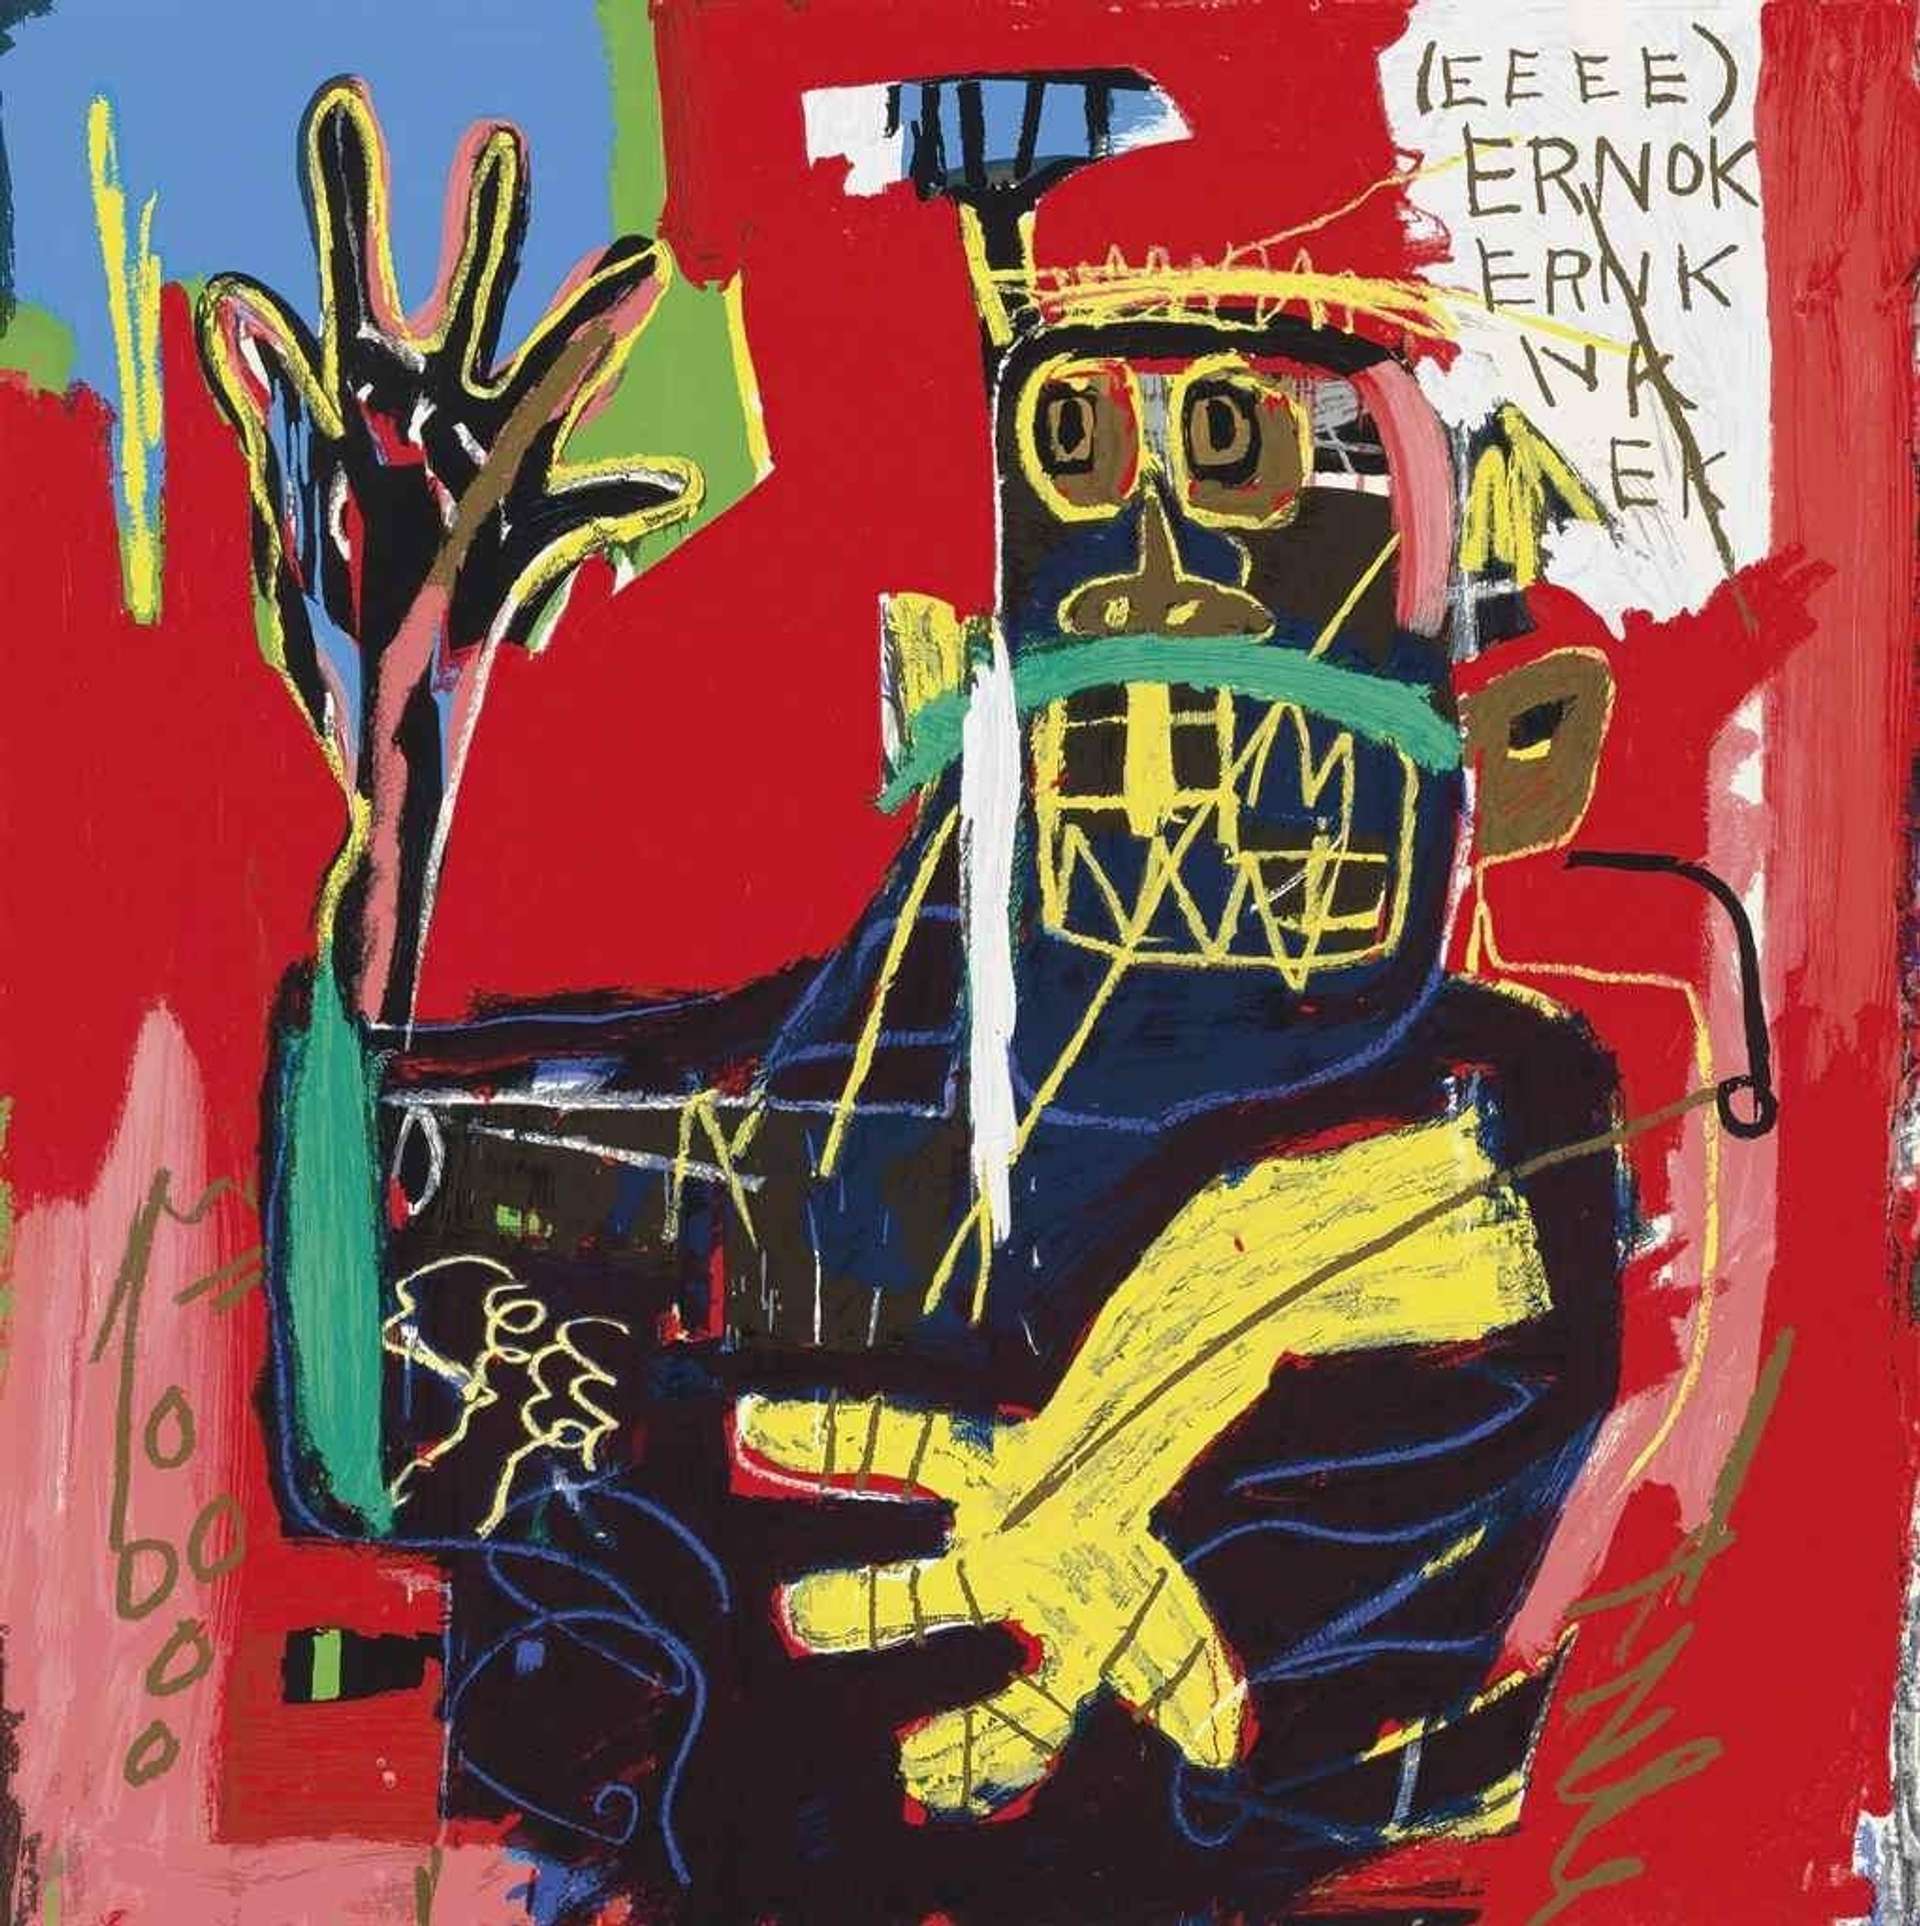 A Buyer’s Guide To Jean-Michel Basquiat